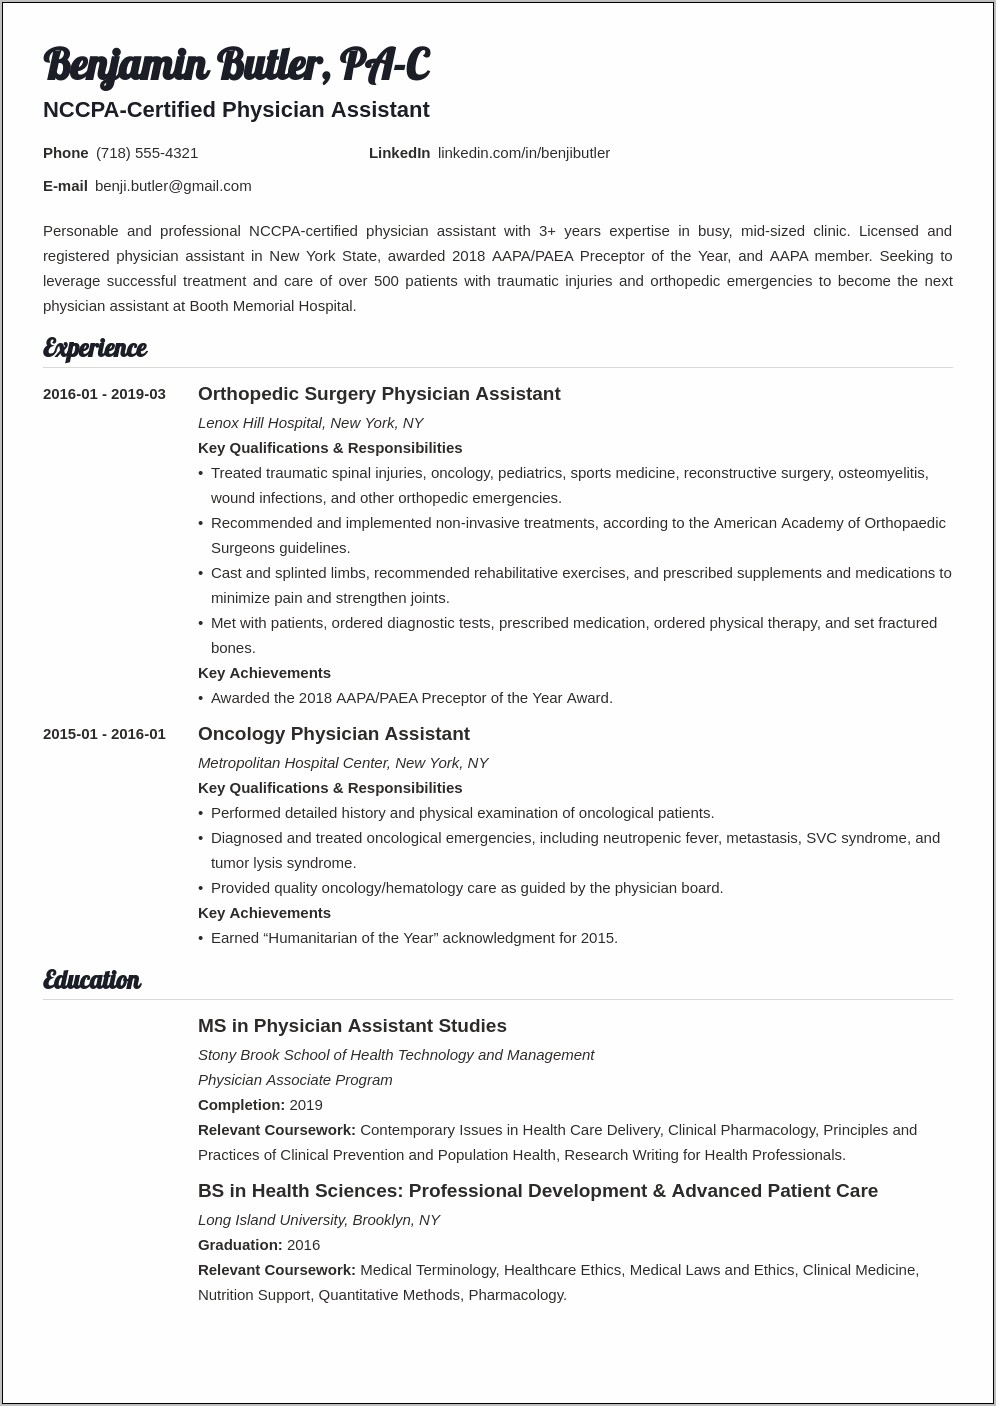 Resume Examples For Medical Assistant For Plastic Surgeons